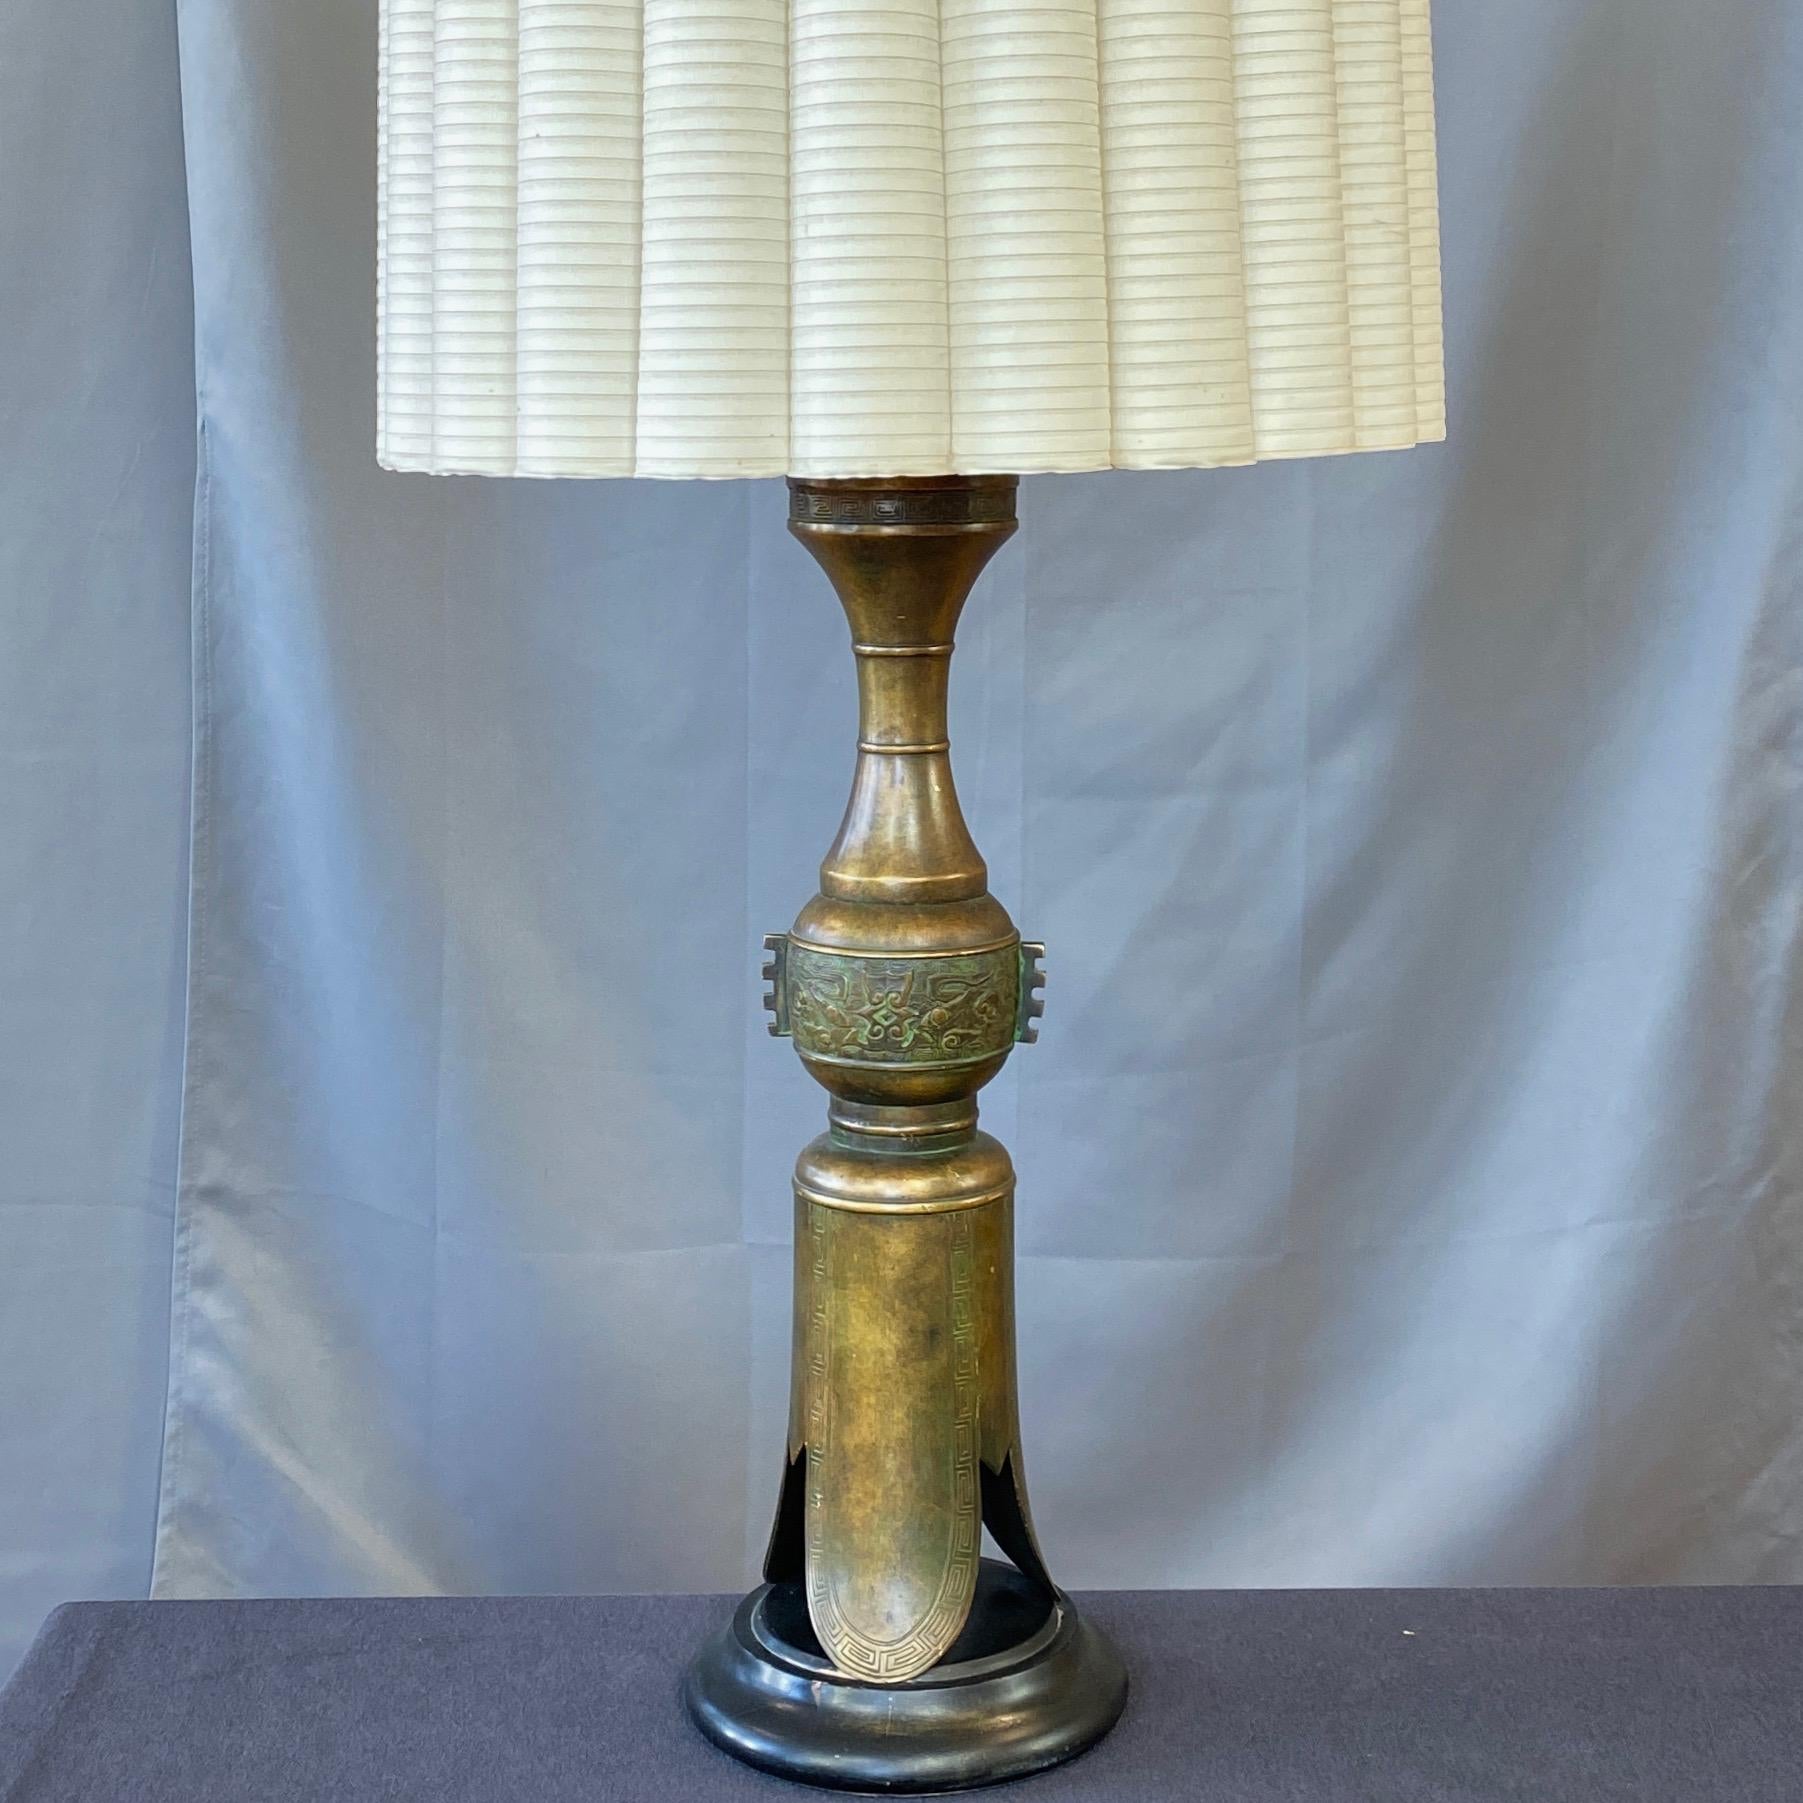 A towering 1950s Chinese archaistic-style brass table lamp by the Marbro Lamp Company, done in the manner of James Mont.

Striking interpretation of a three-footed archaic ritual bronze from the Shang or Zhou dynasties. Such vessels furnished the